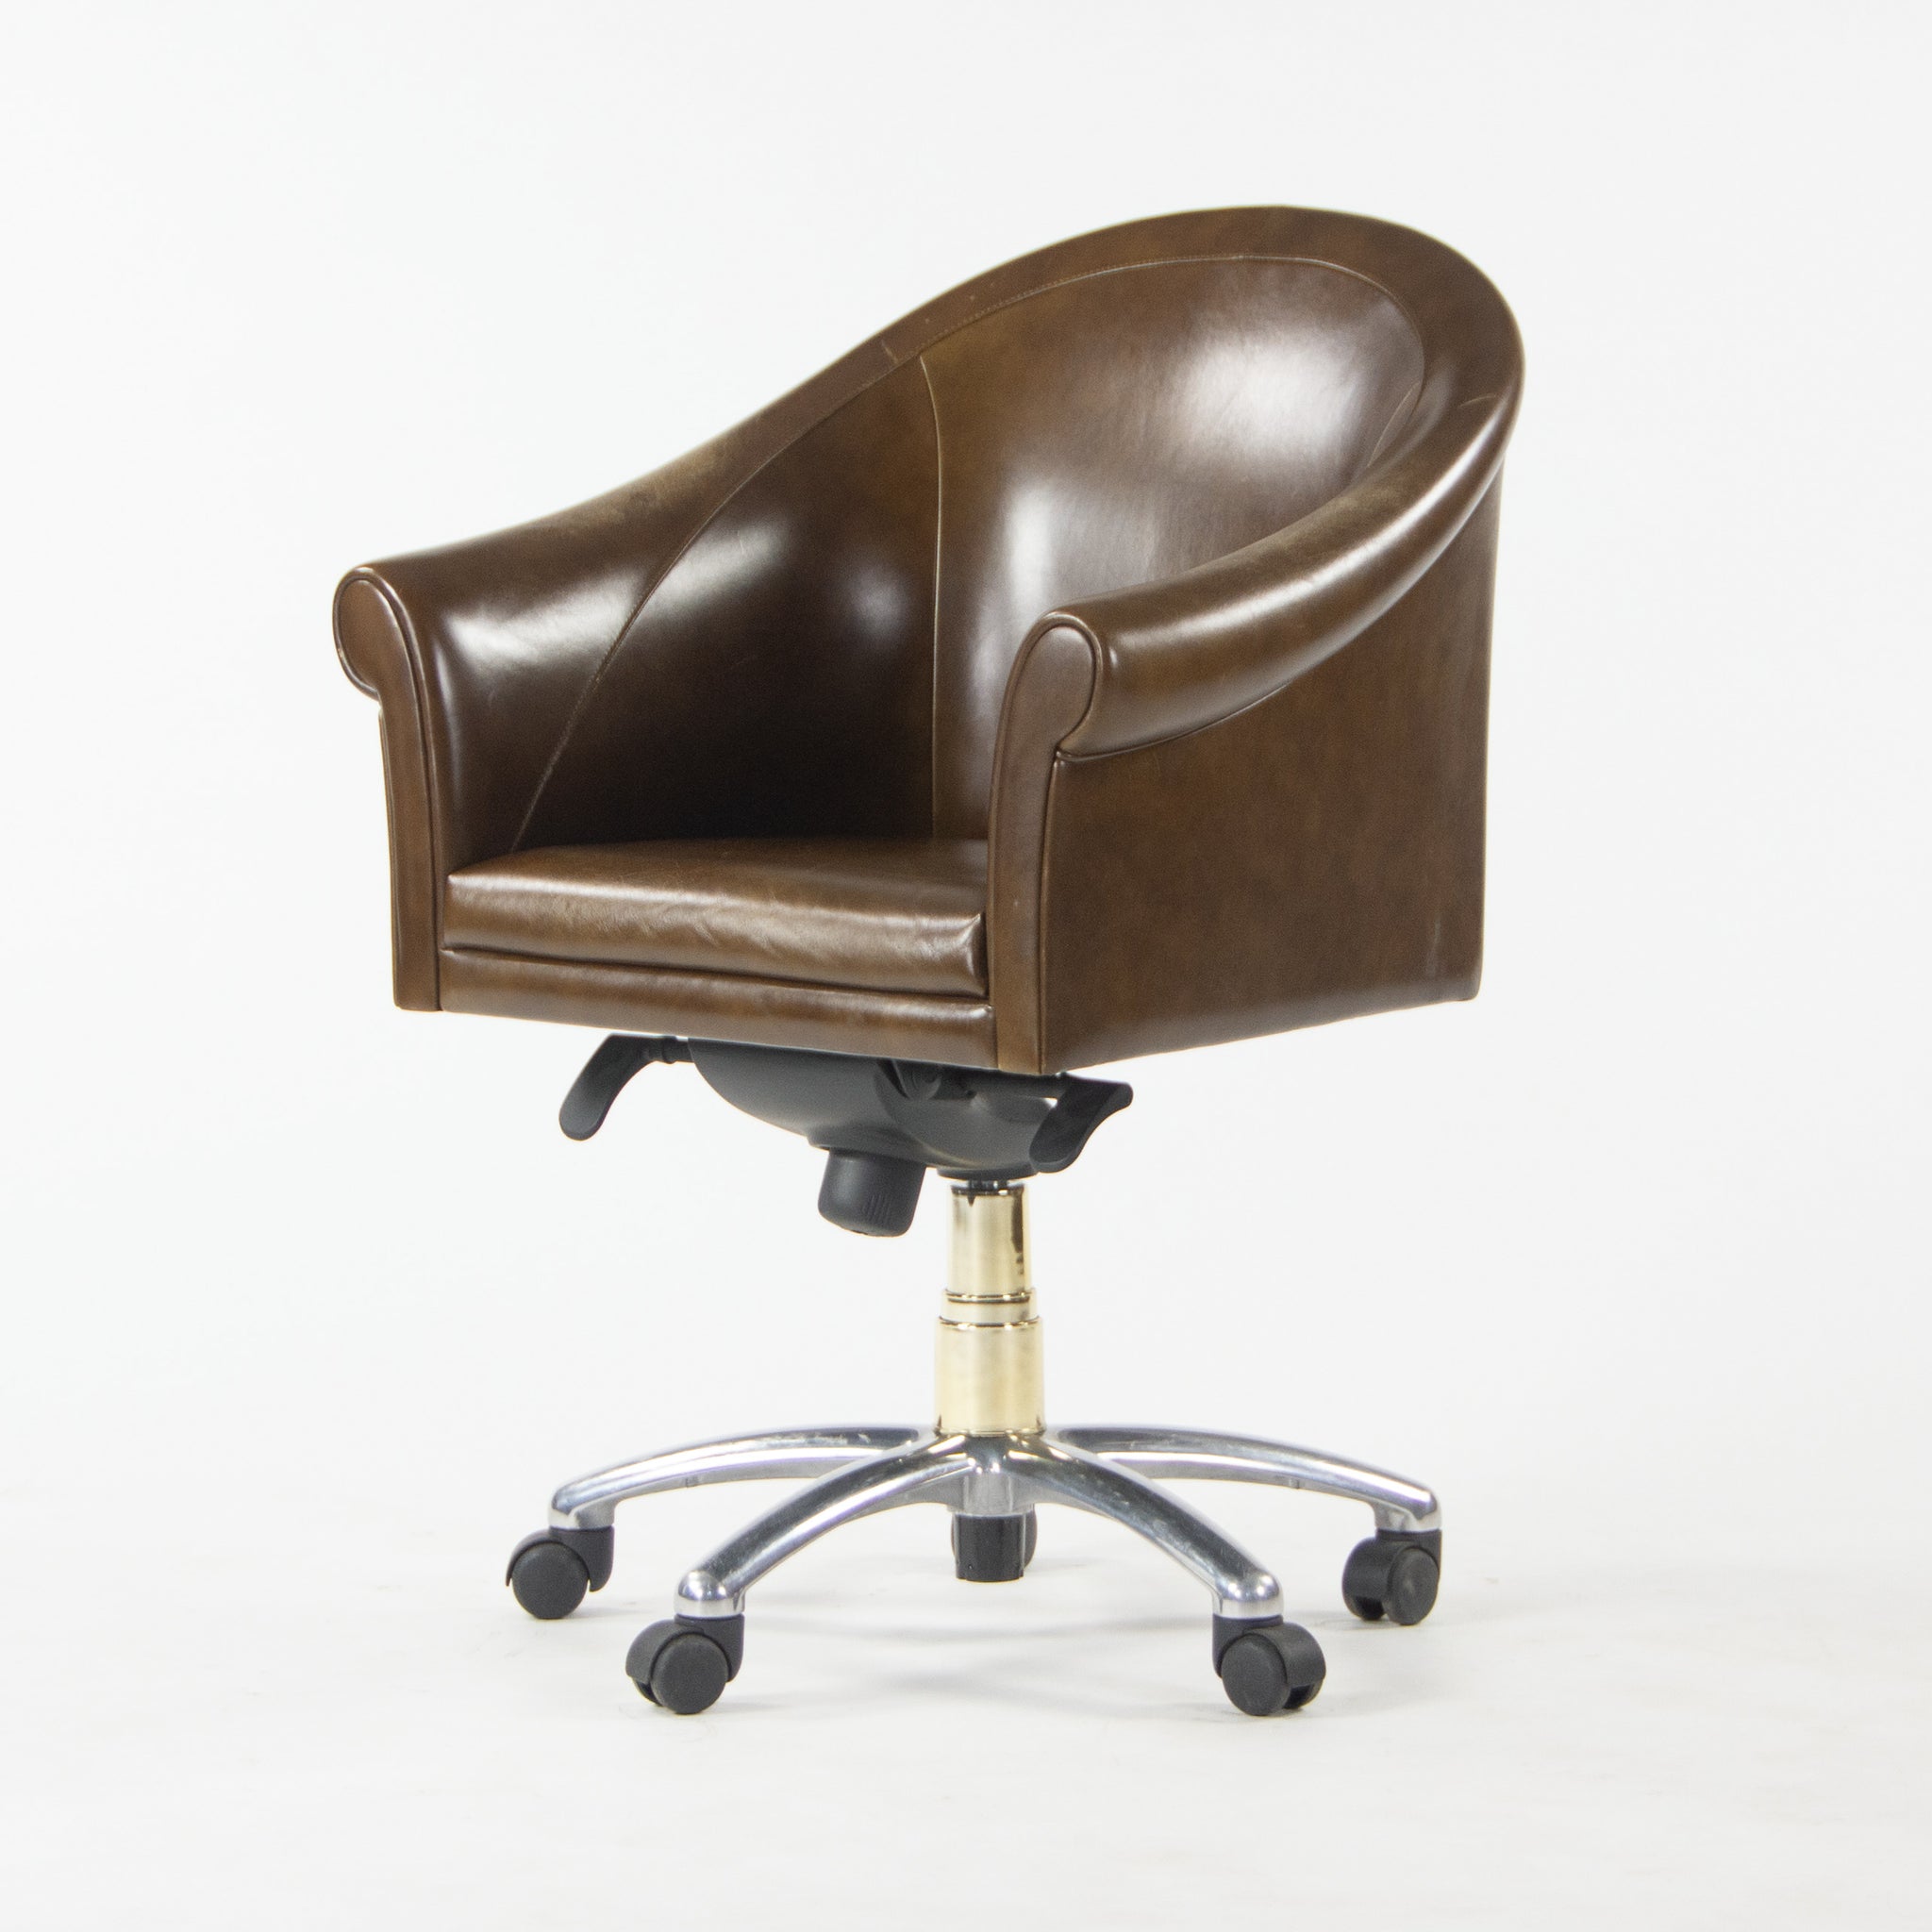 Poltrona Frau Brown Leather Luca Scacchetti Sinan Office Desk Chair Multiples Available